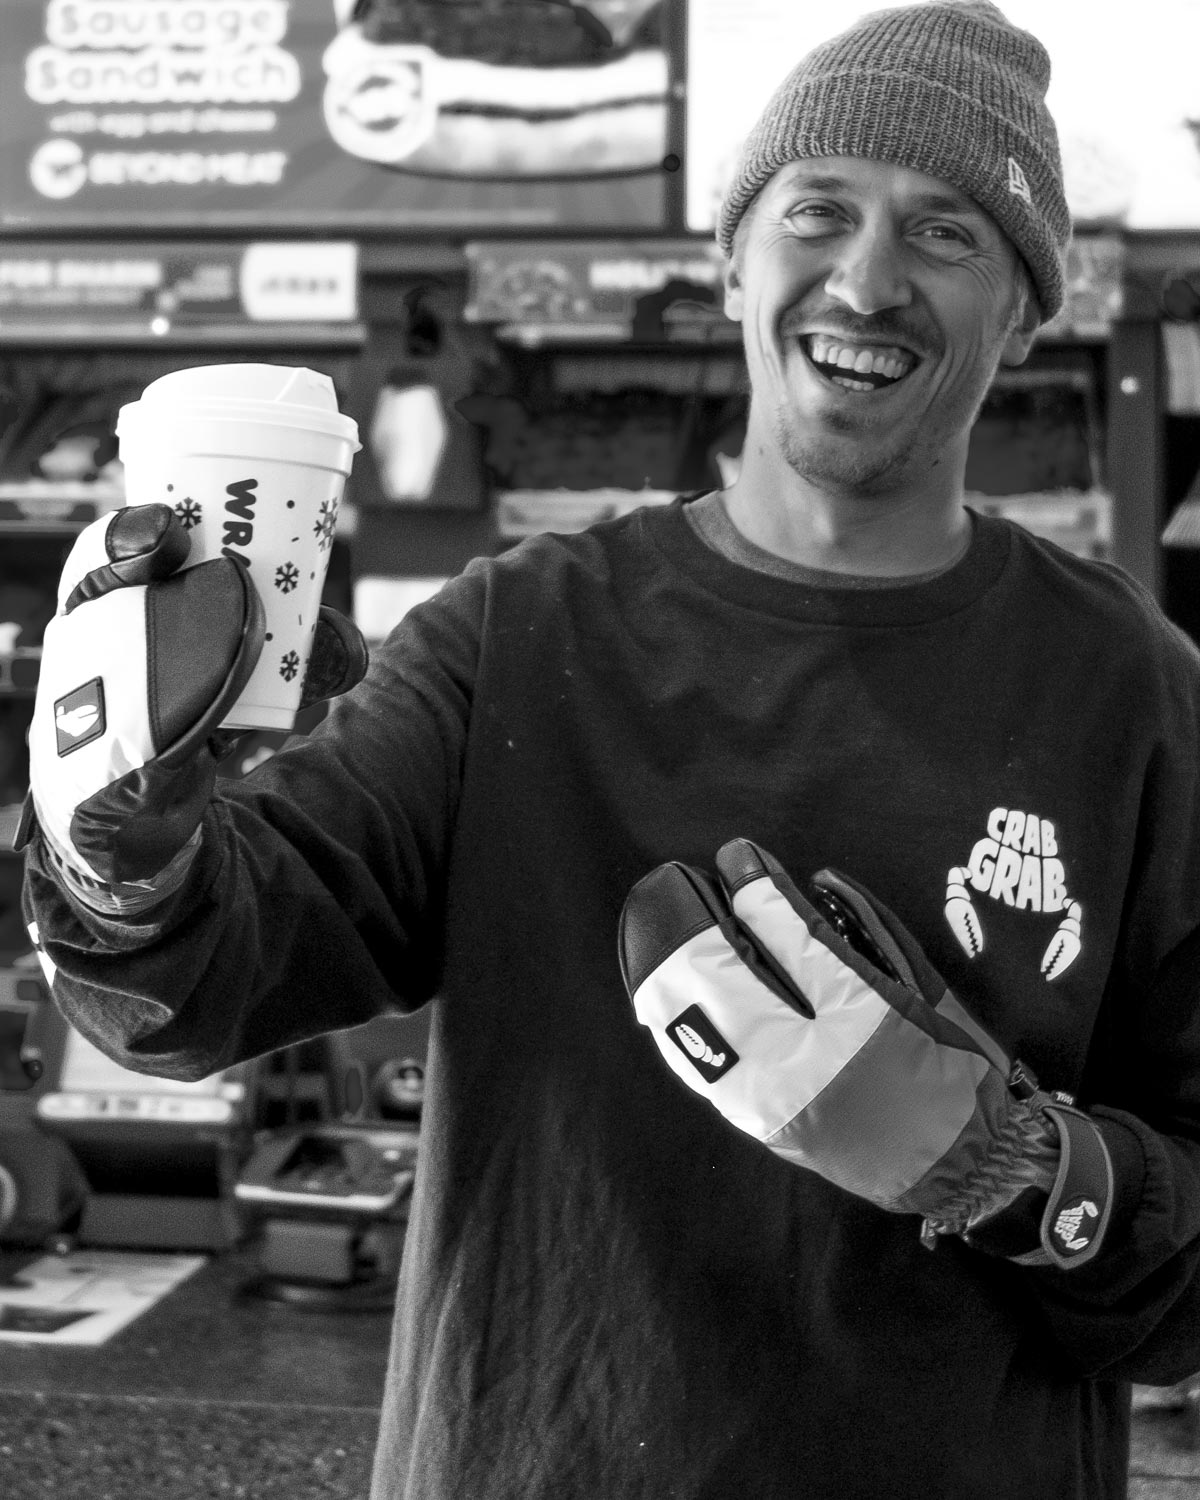 Gloves and Mittens – tagged Crab Grab – Always Boardshop